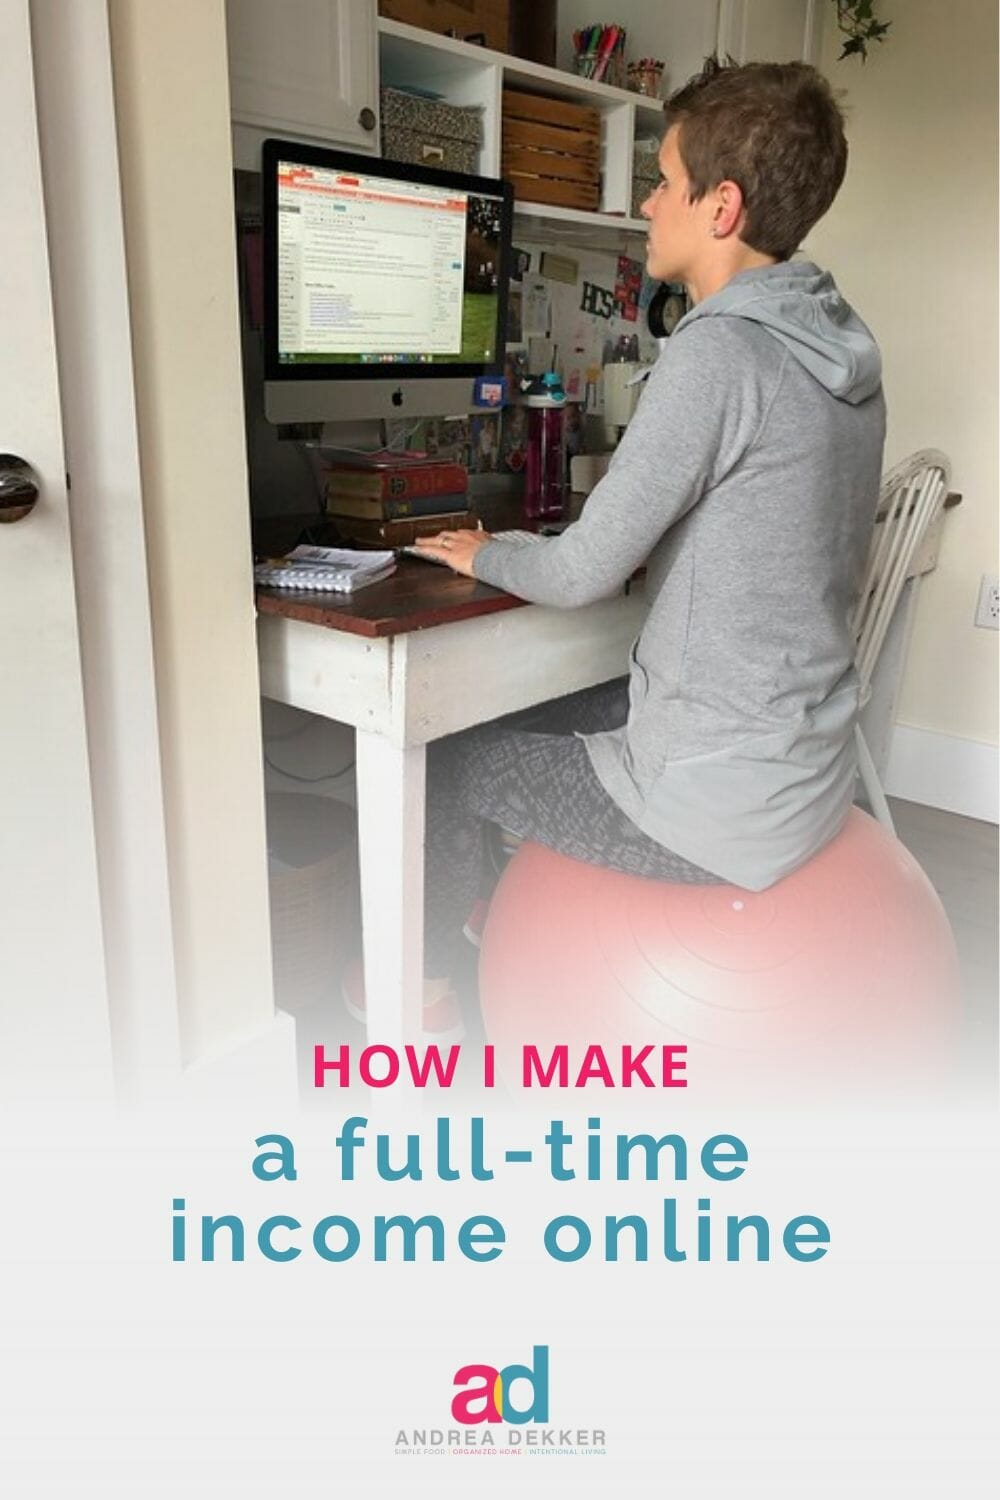 The online world has huge income potential. If you've ever wondered how to make money working online from home, this post is sure to be a helpful resource! Read more about my work-from-home journey over the last 13 years, as well as some of my favorite resources to help YOU make money working online! via @andreadekker